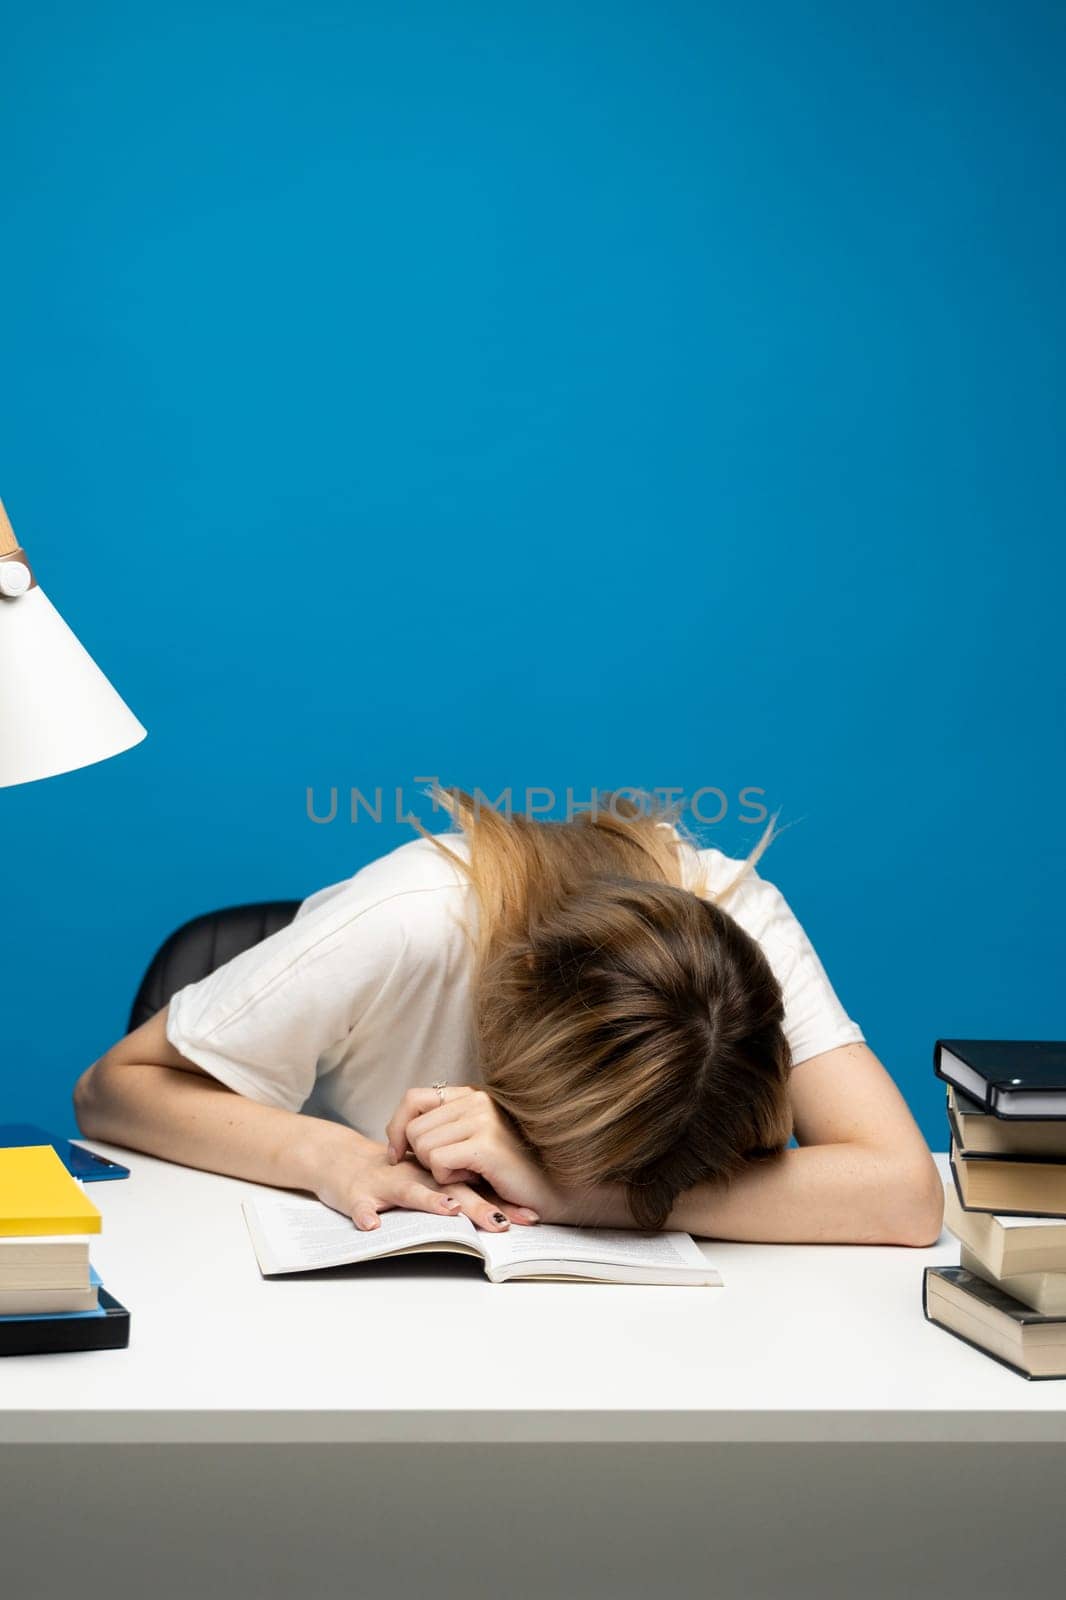 Student studying exam and sleeping on books on a blue background. Tired student girl with glasses sleeping on the books in the library. by vovsht